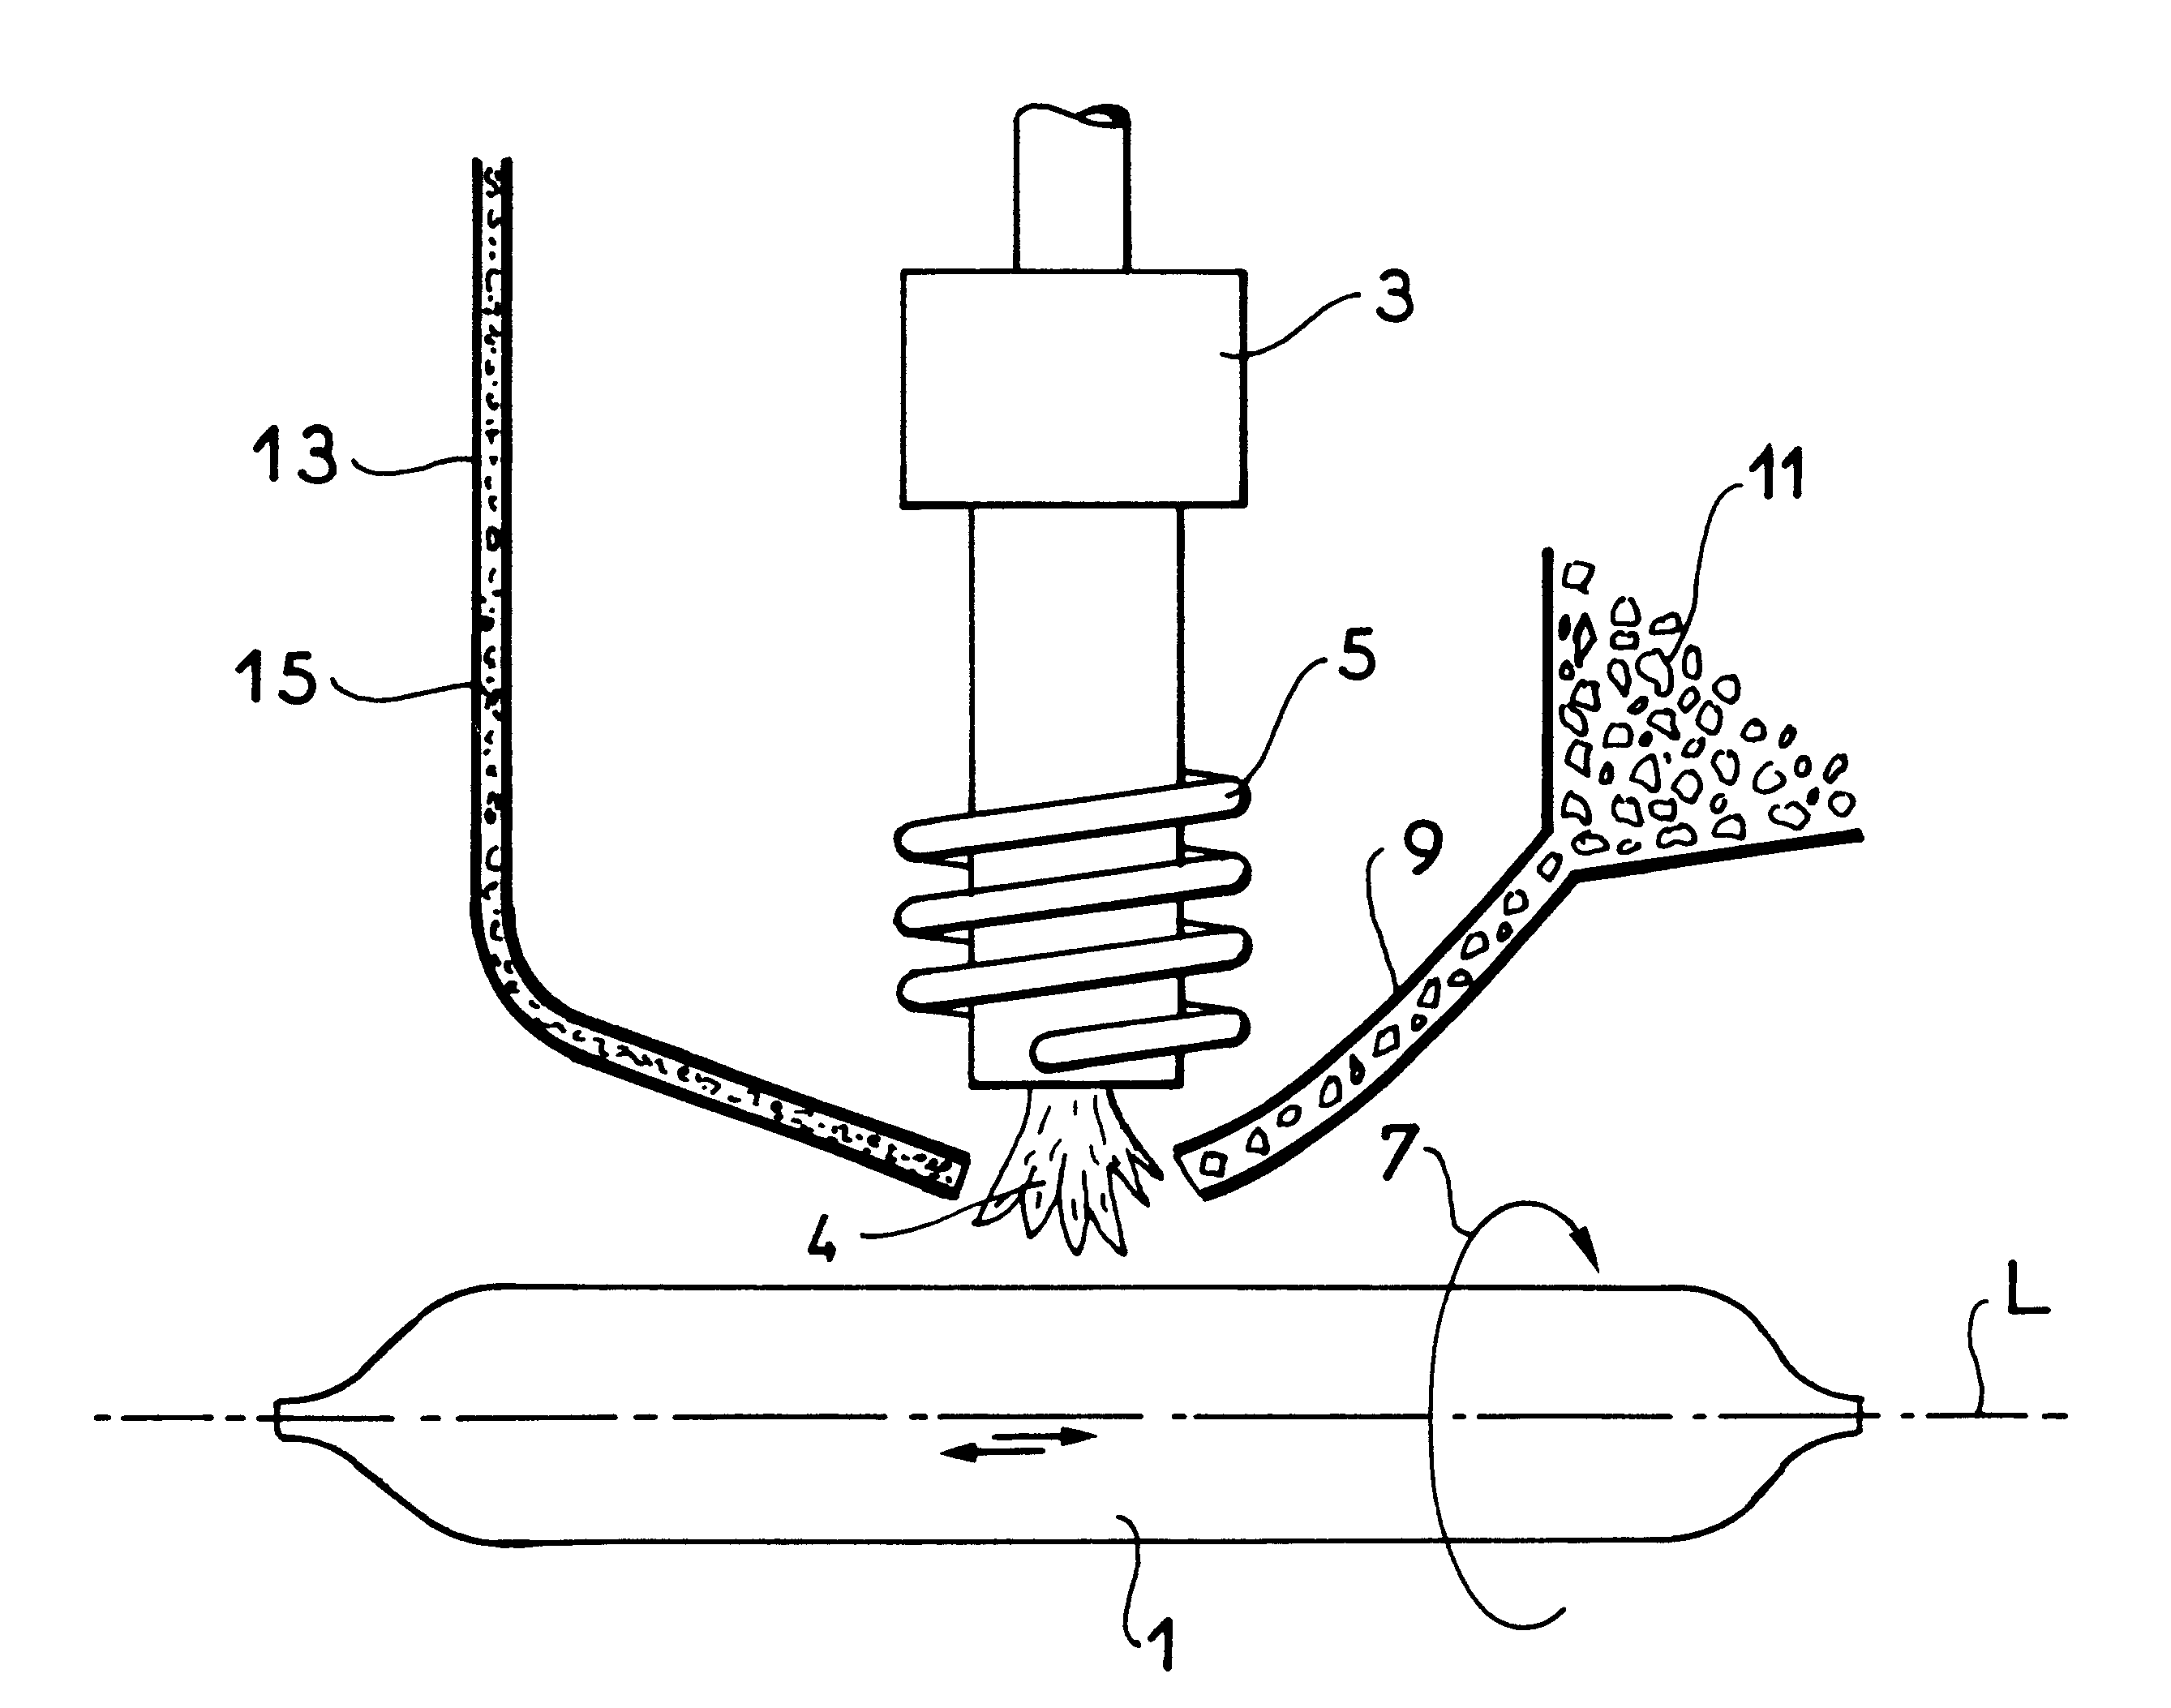 Method of purifying natural or synthetic silica, and application thereof to depositing purified natural or synthetic silica on an optical fiber preform